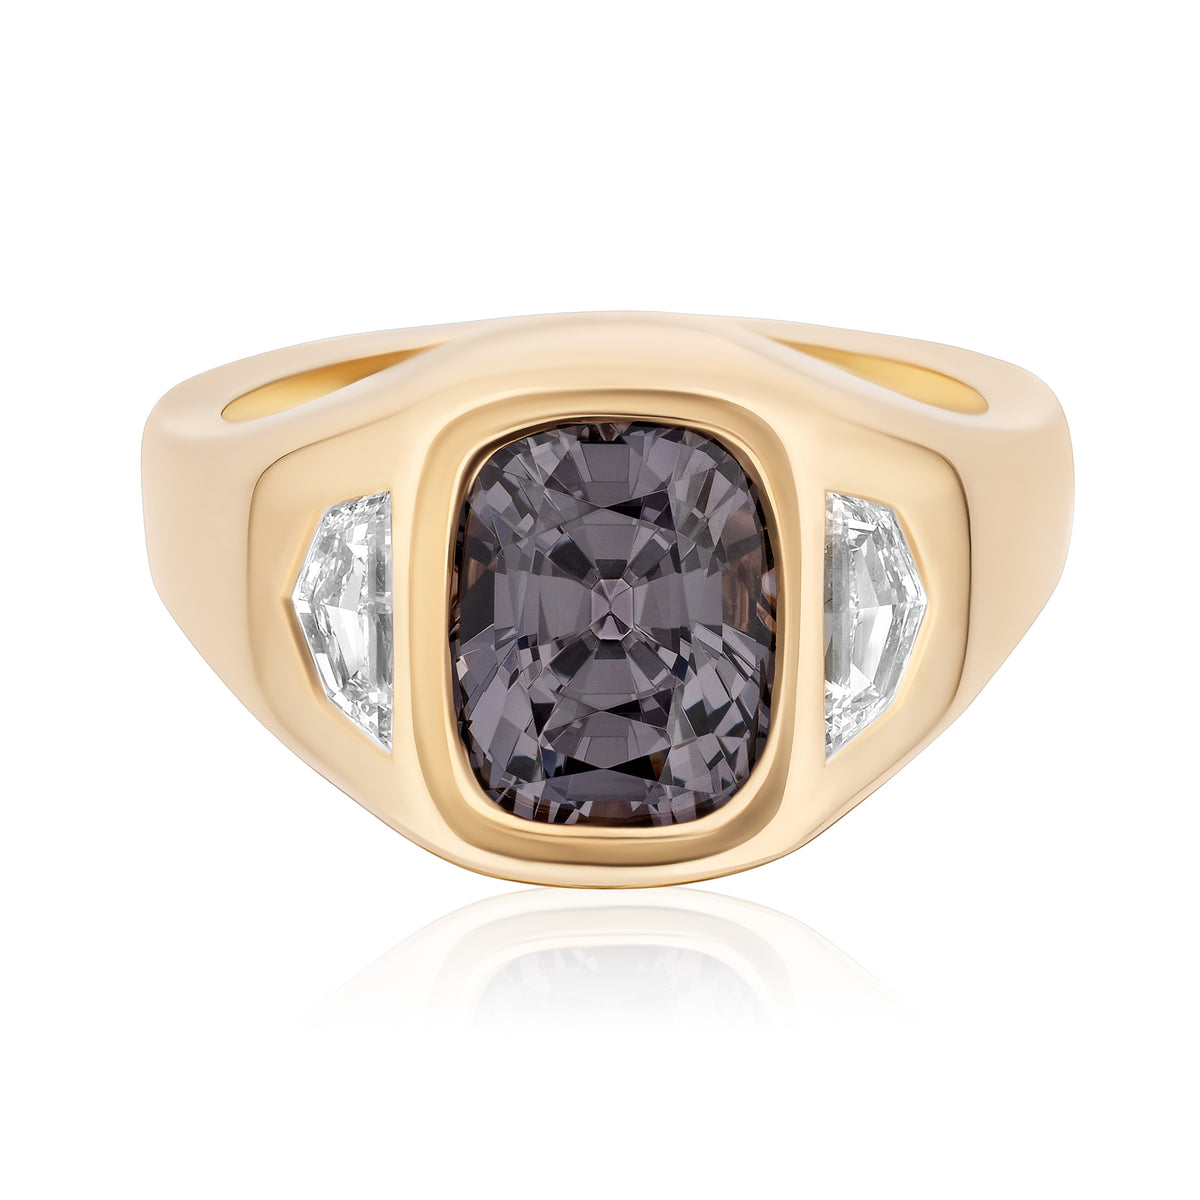 Gypsy Ring in Yellow Gold with Cushion Cut Spinel and Diamond Epaulette Side Stones